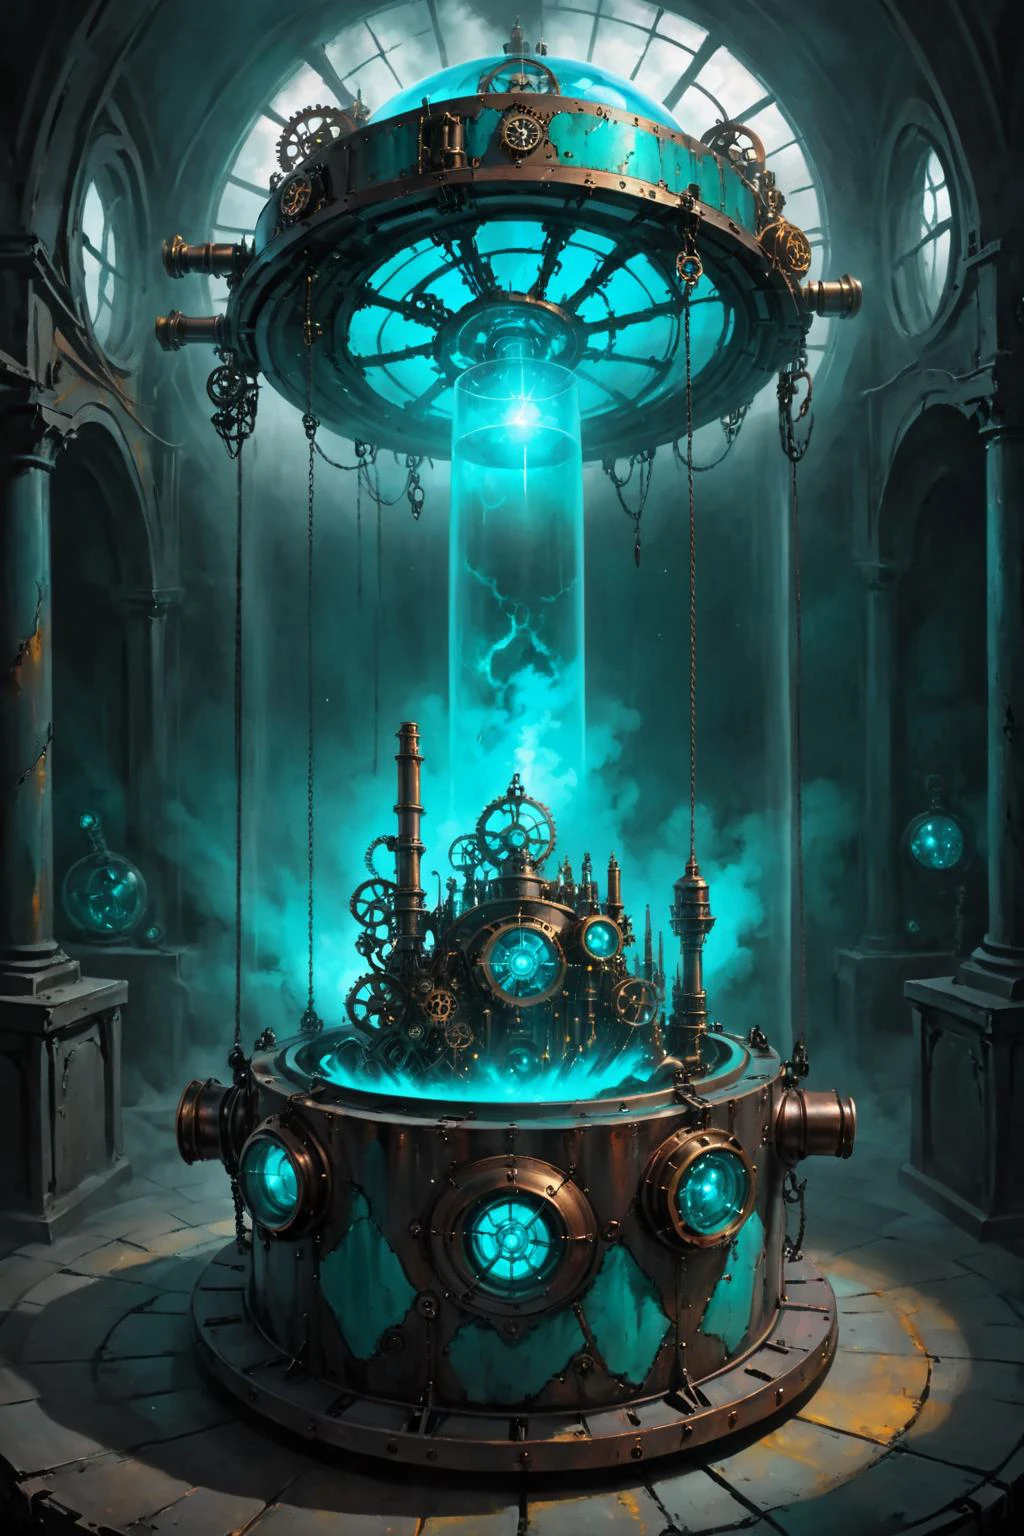 contained color, Empty Hate inside of a large steampunk container with (cyan  tinted glass), painted world, post human resources era with the meaning humanity transcends to nothing eternal eternal after me / a motherhood that does again grow before motherhood